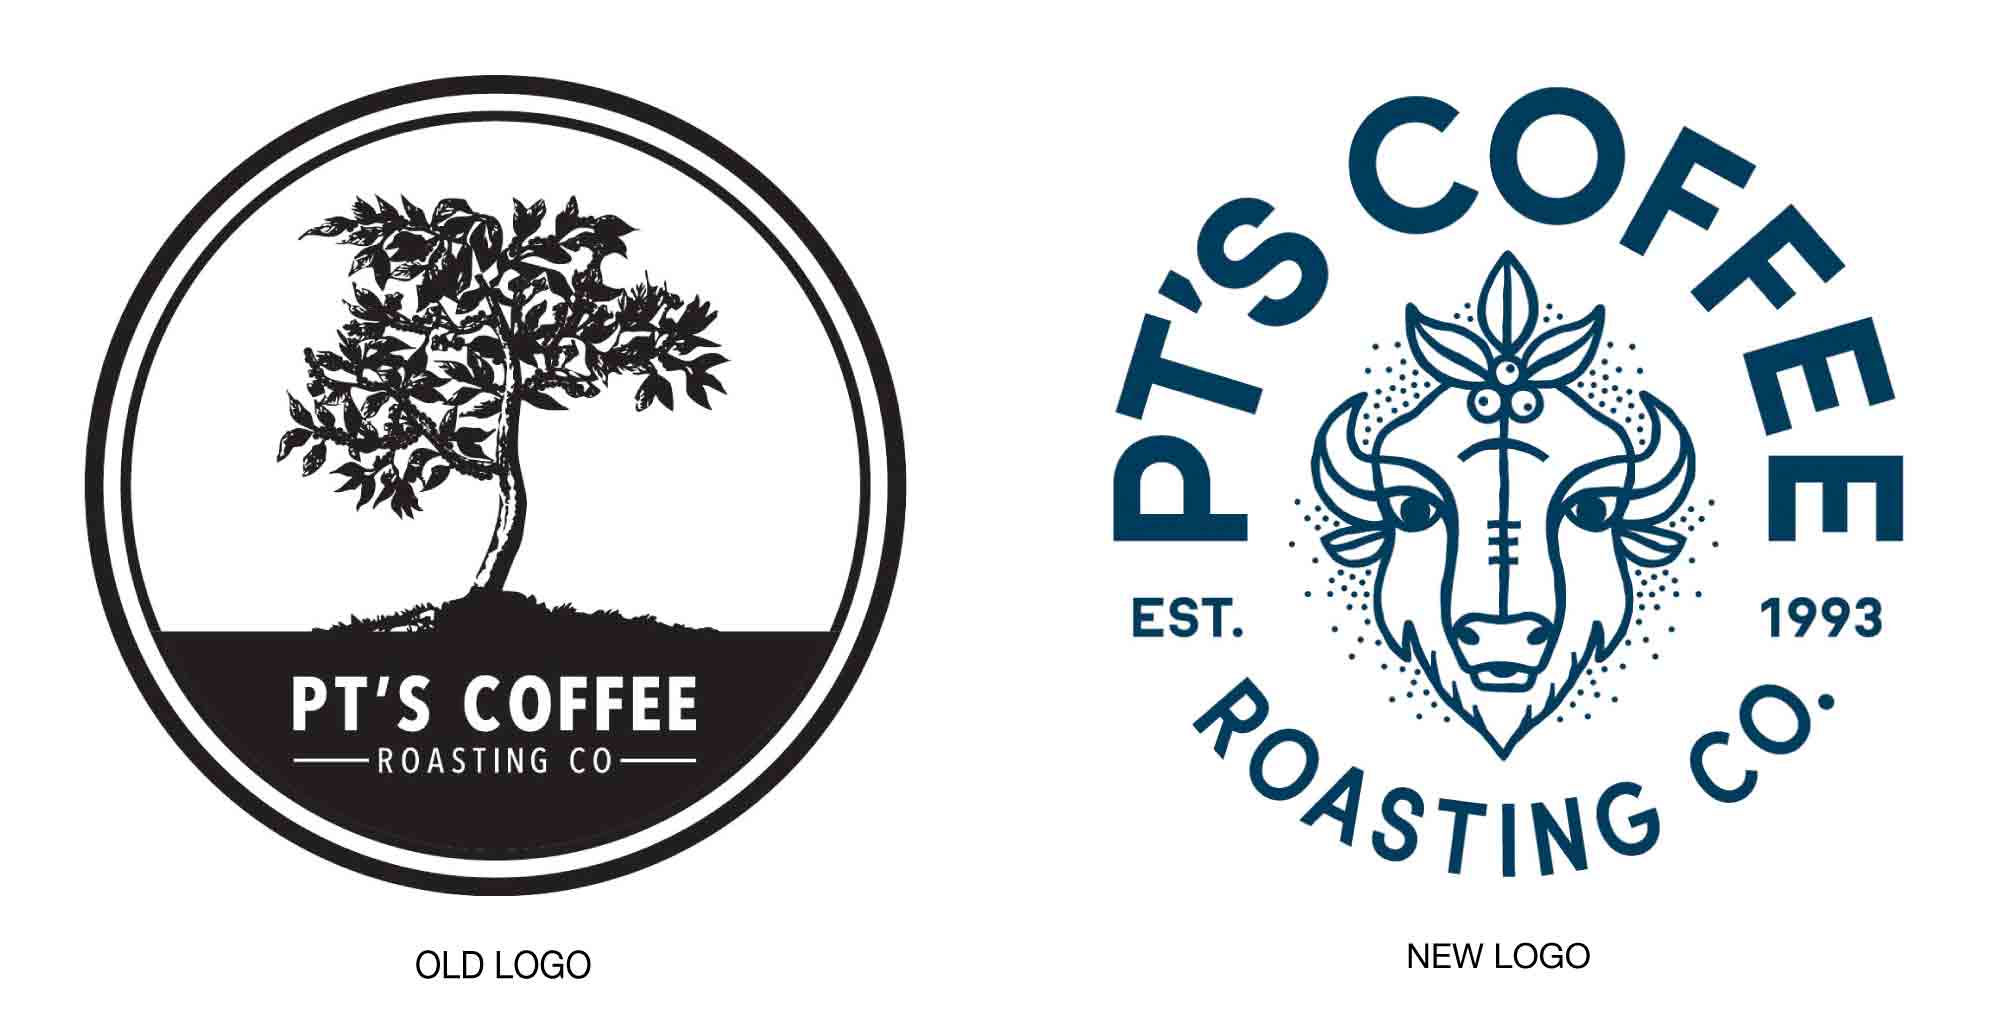 Prominent S Logo - New Identity for PT's Coffee Roasting Co. | Articles | LogoLounge